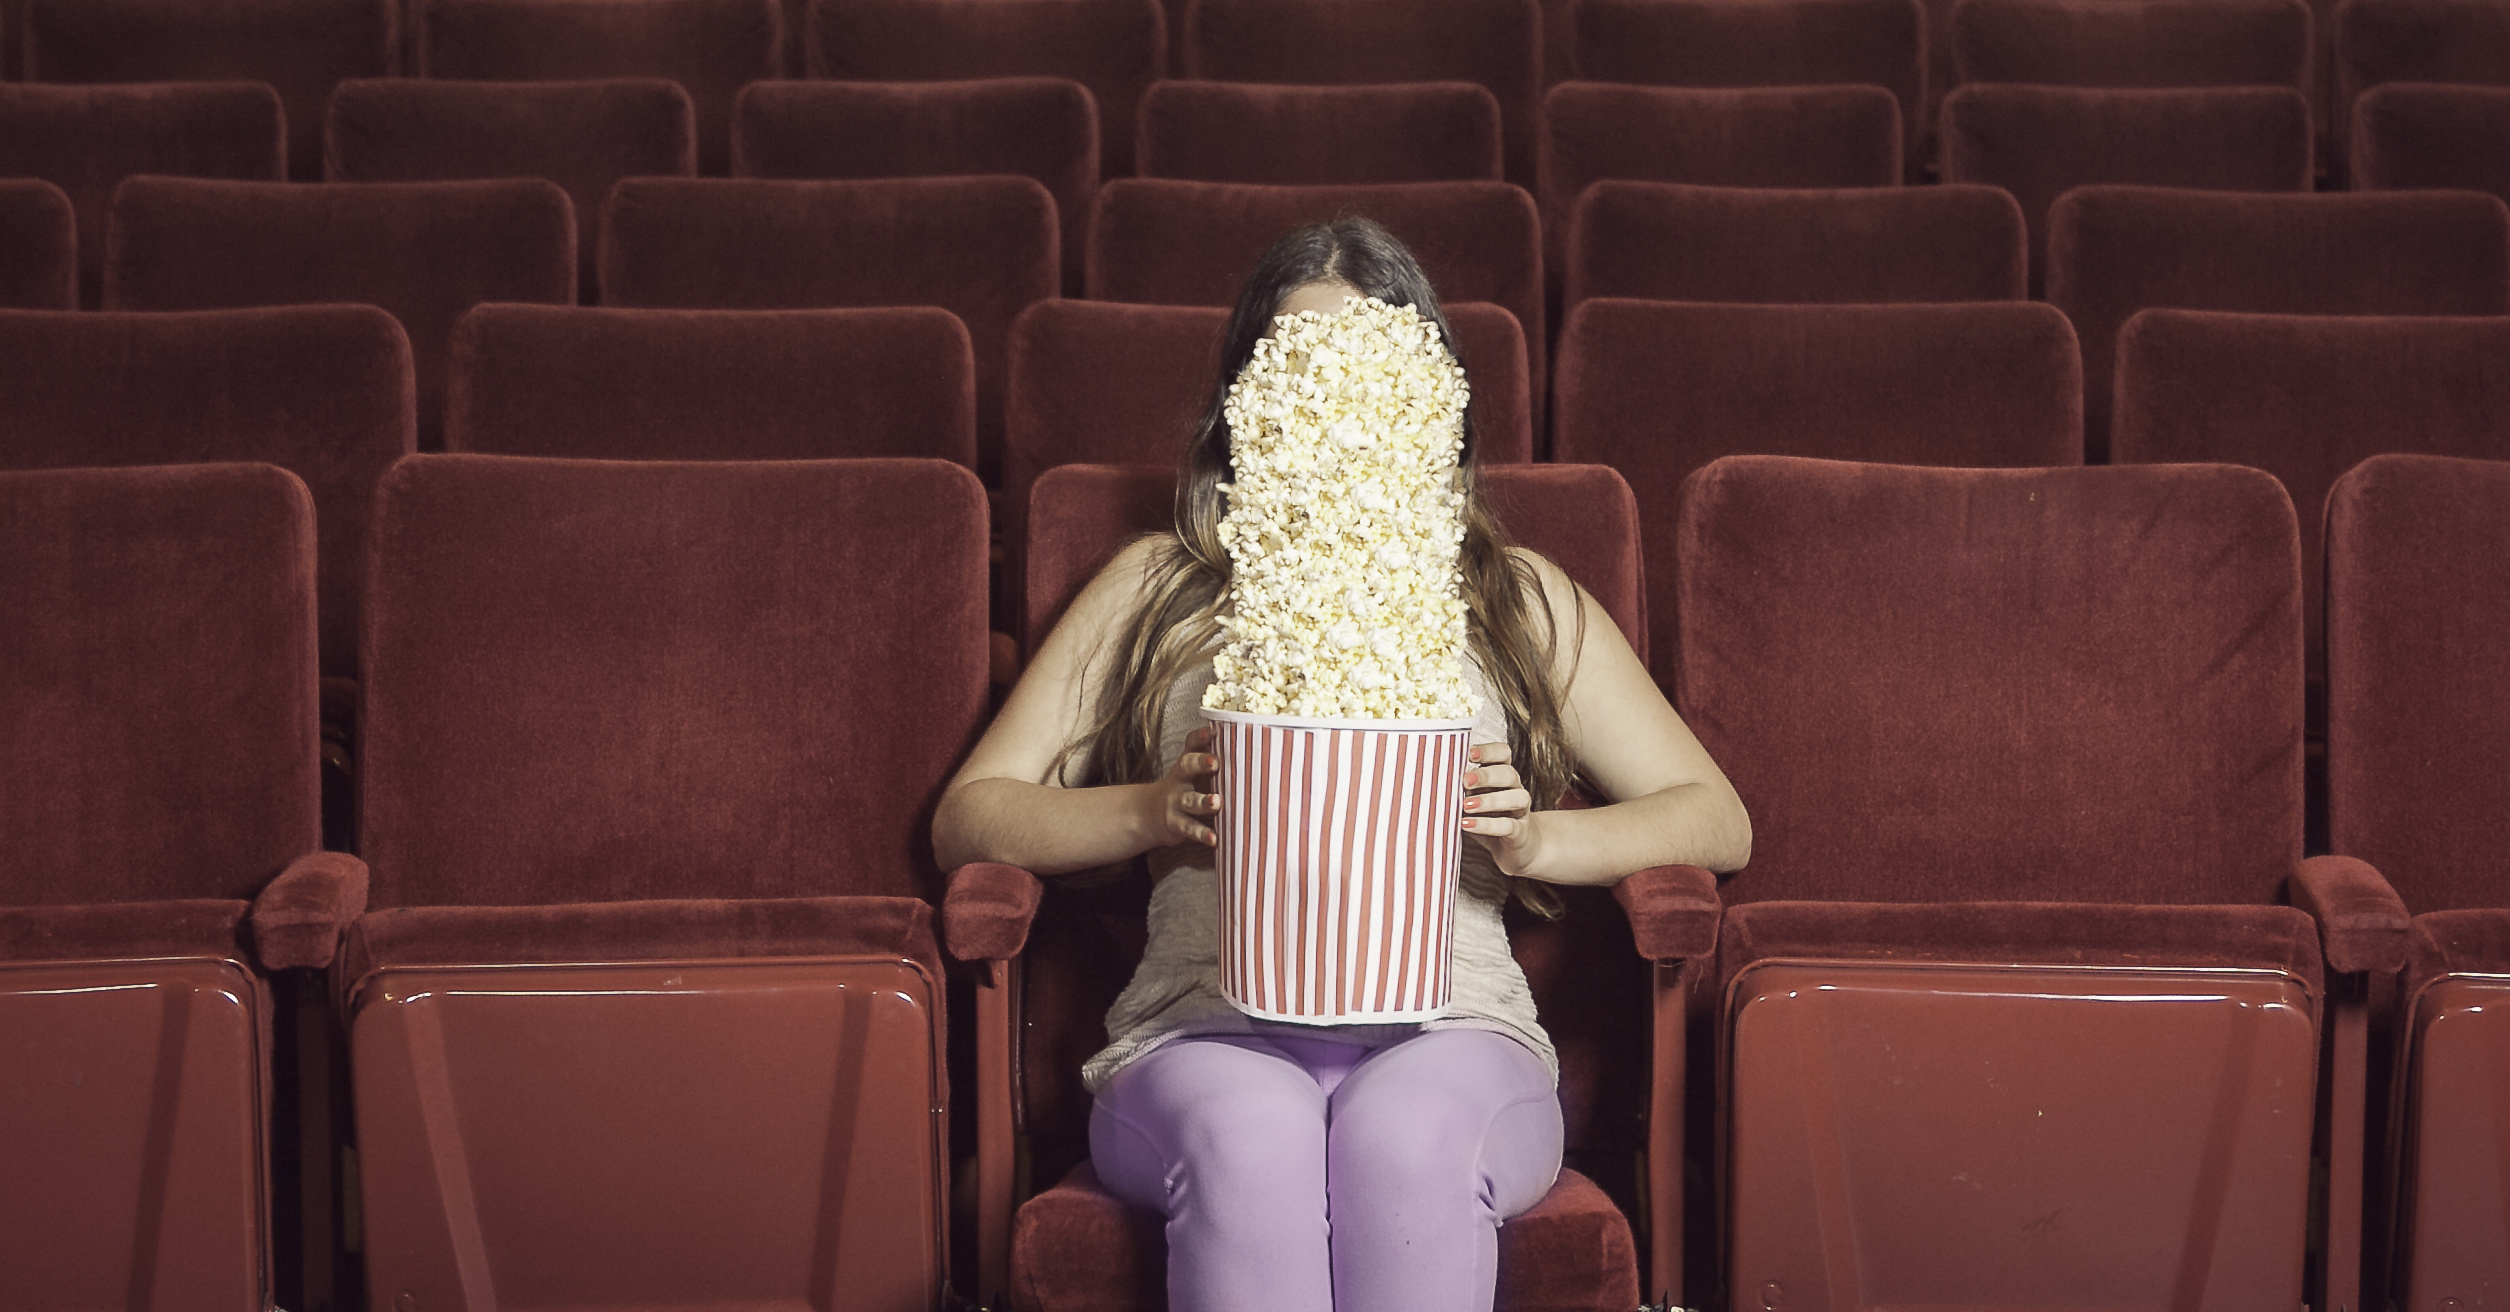 Movie theater etiquette, Do's and don'ts, Theater manners, Respectful audience, 2510x1320 HD Desktop